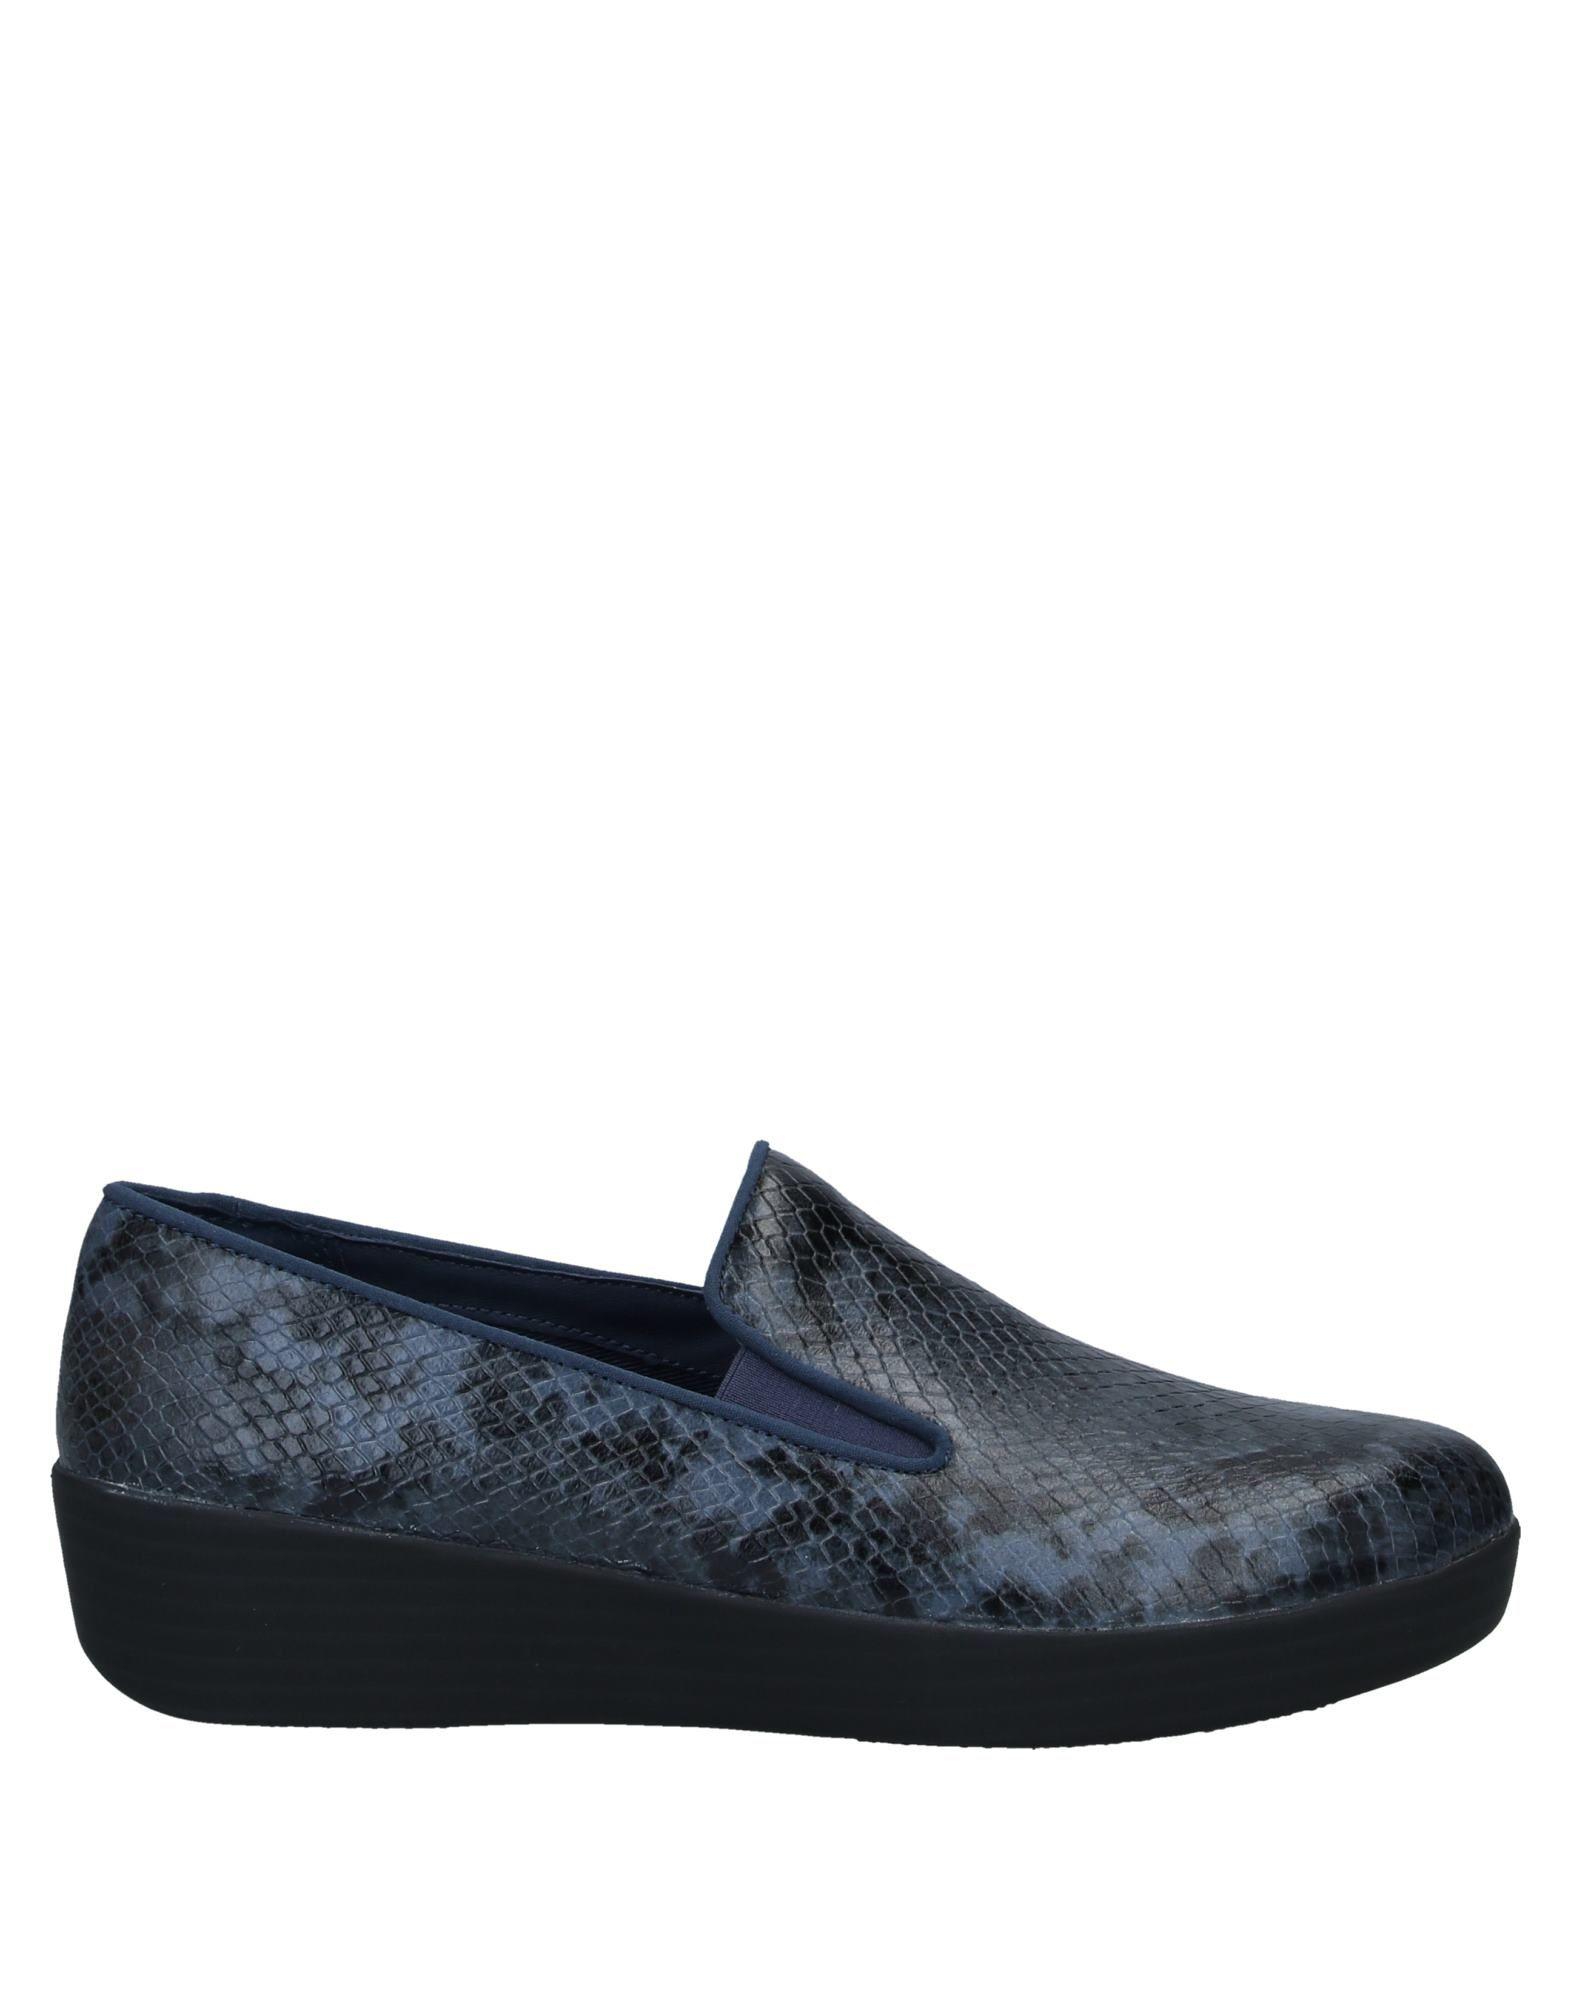 Fitflop Leather Loafer in Dark Blue (Blue) - Lyst